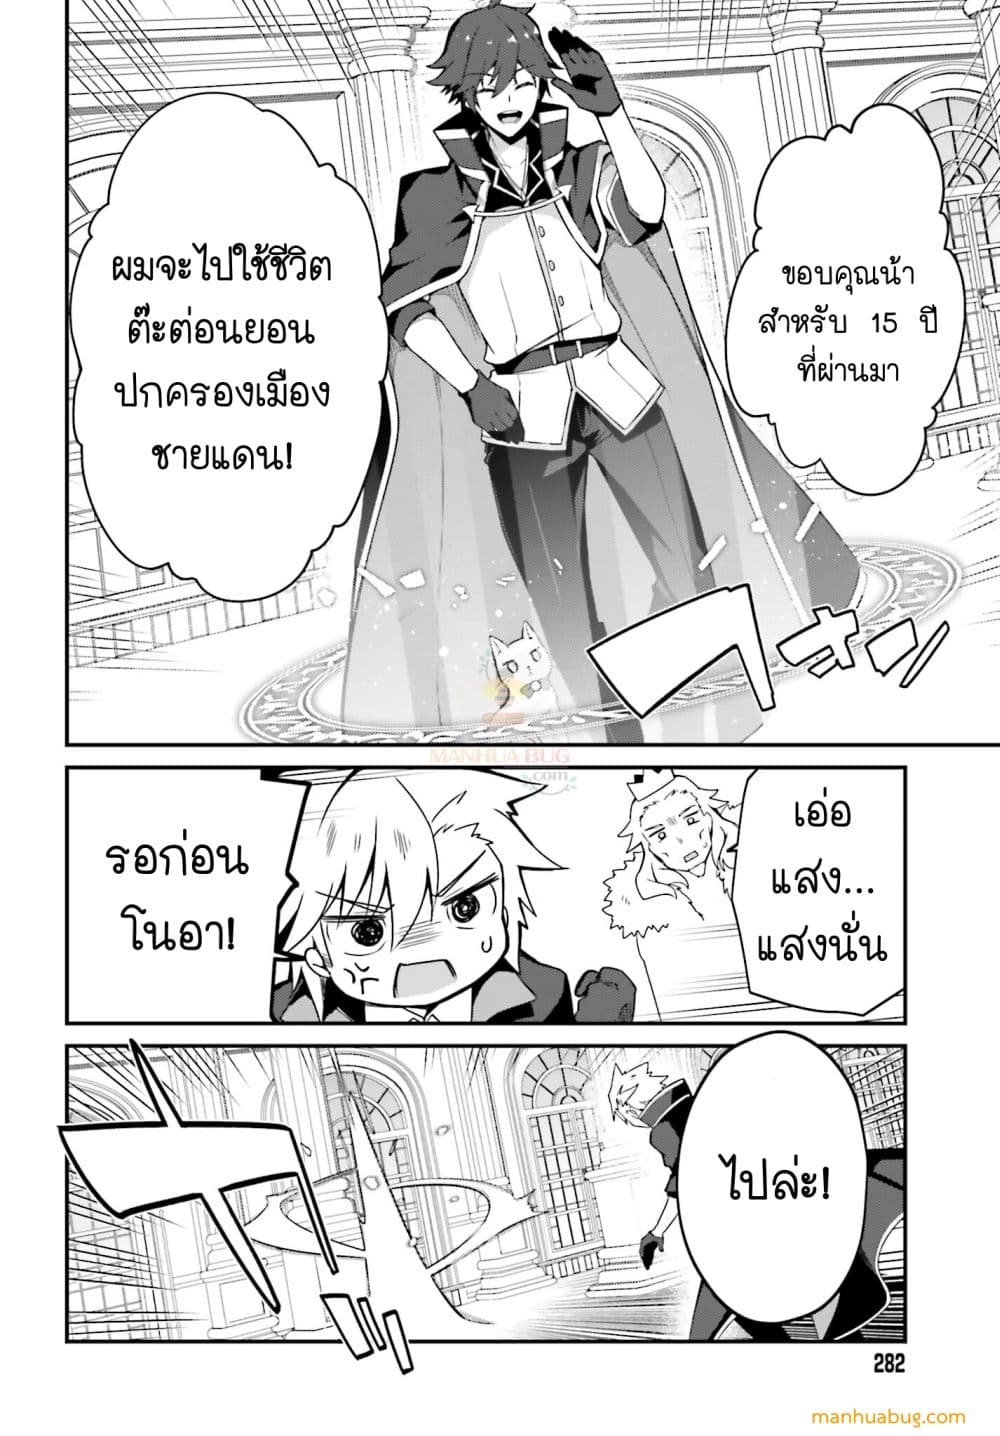 THE INCOMPETENT PRINCE WHO HAS BEEN BANISHED WANTS TO HIDE HIS ABILITIES~ ตอนที่ 1 (15)